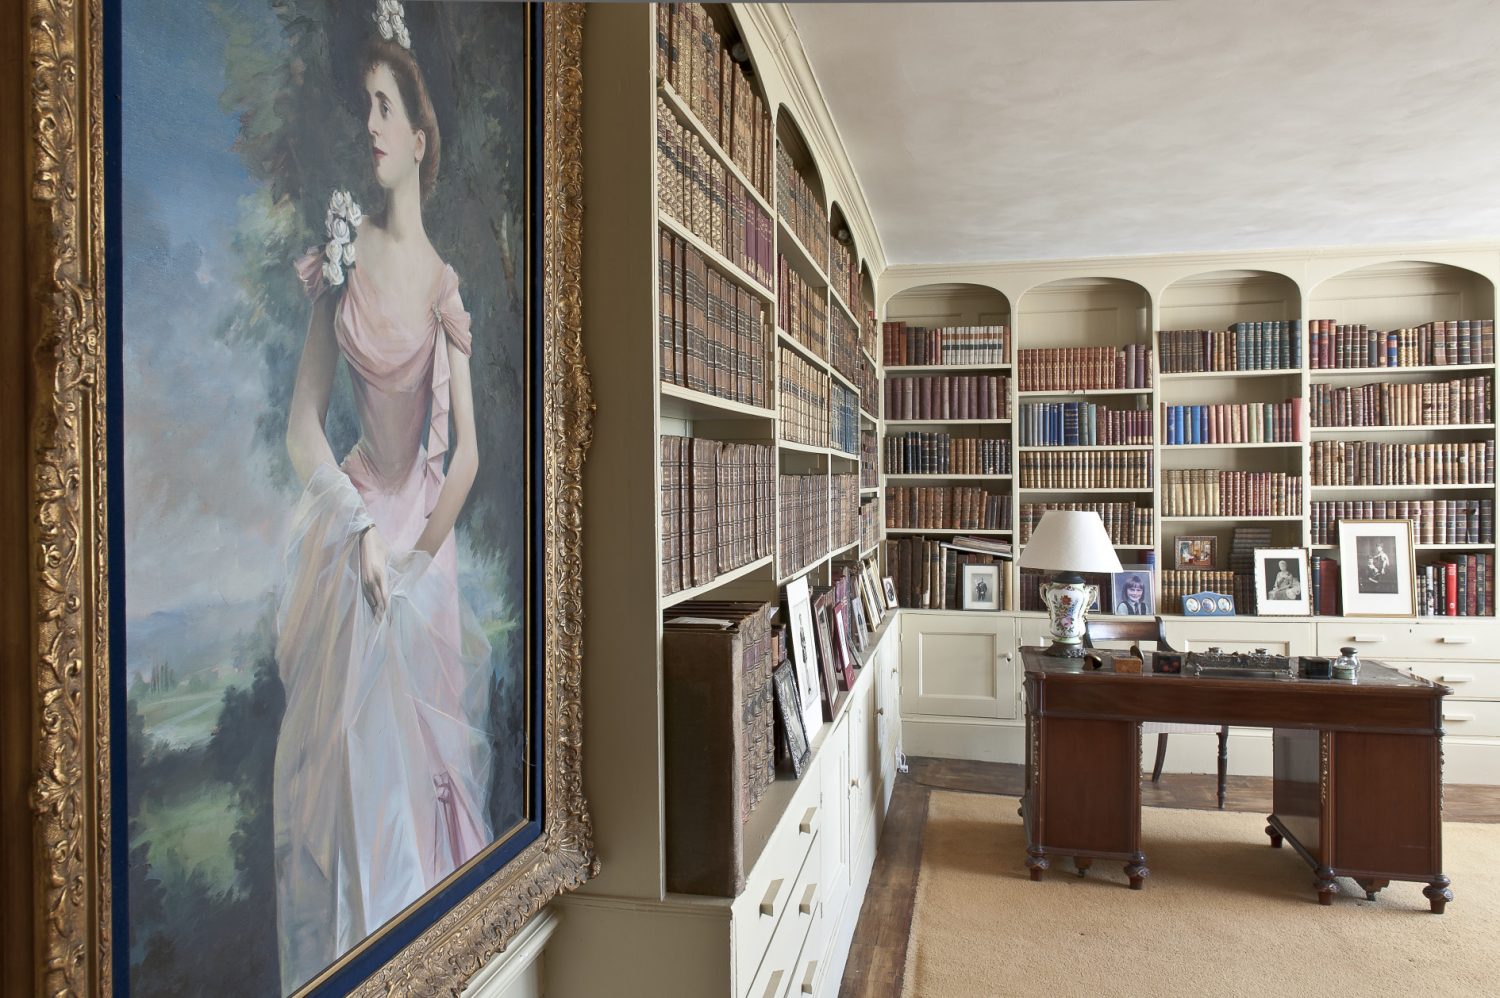 The library walls are painted a soft ochre yellow and two sides of the room feature floor to ceiling cupboards and shelves that support hundreds of leather-bound books.